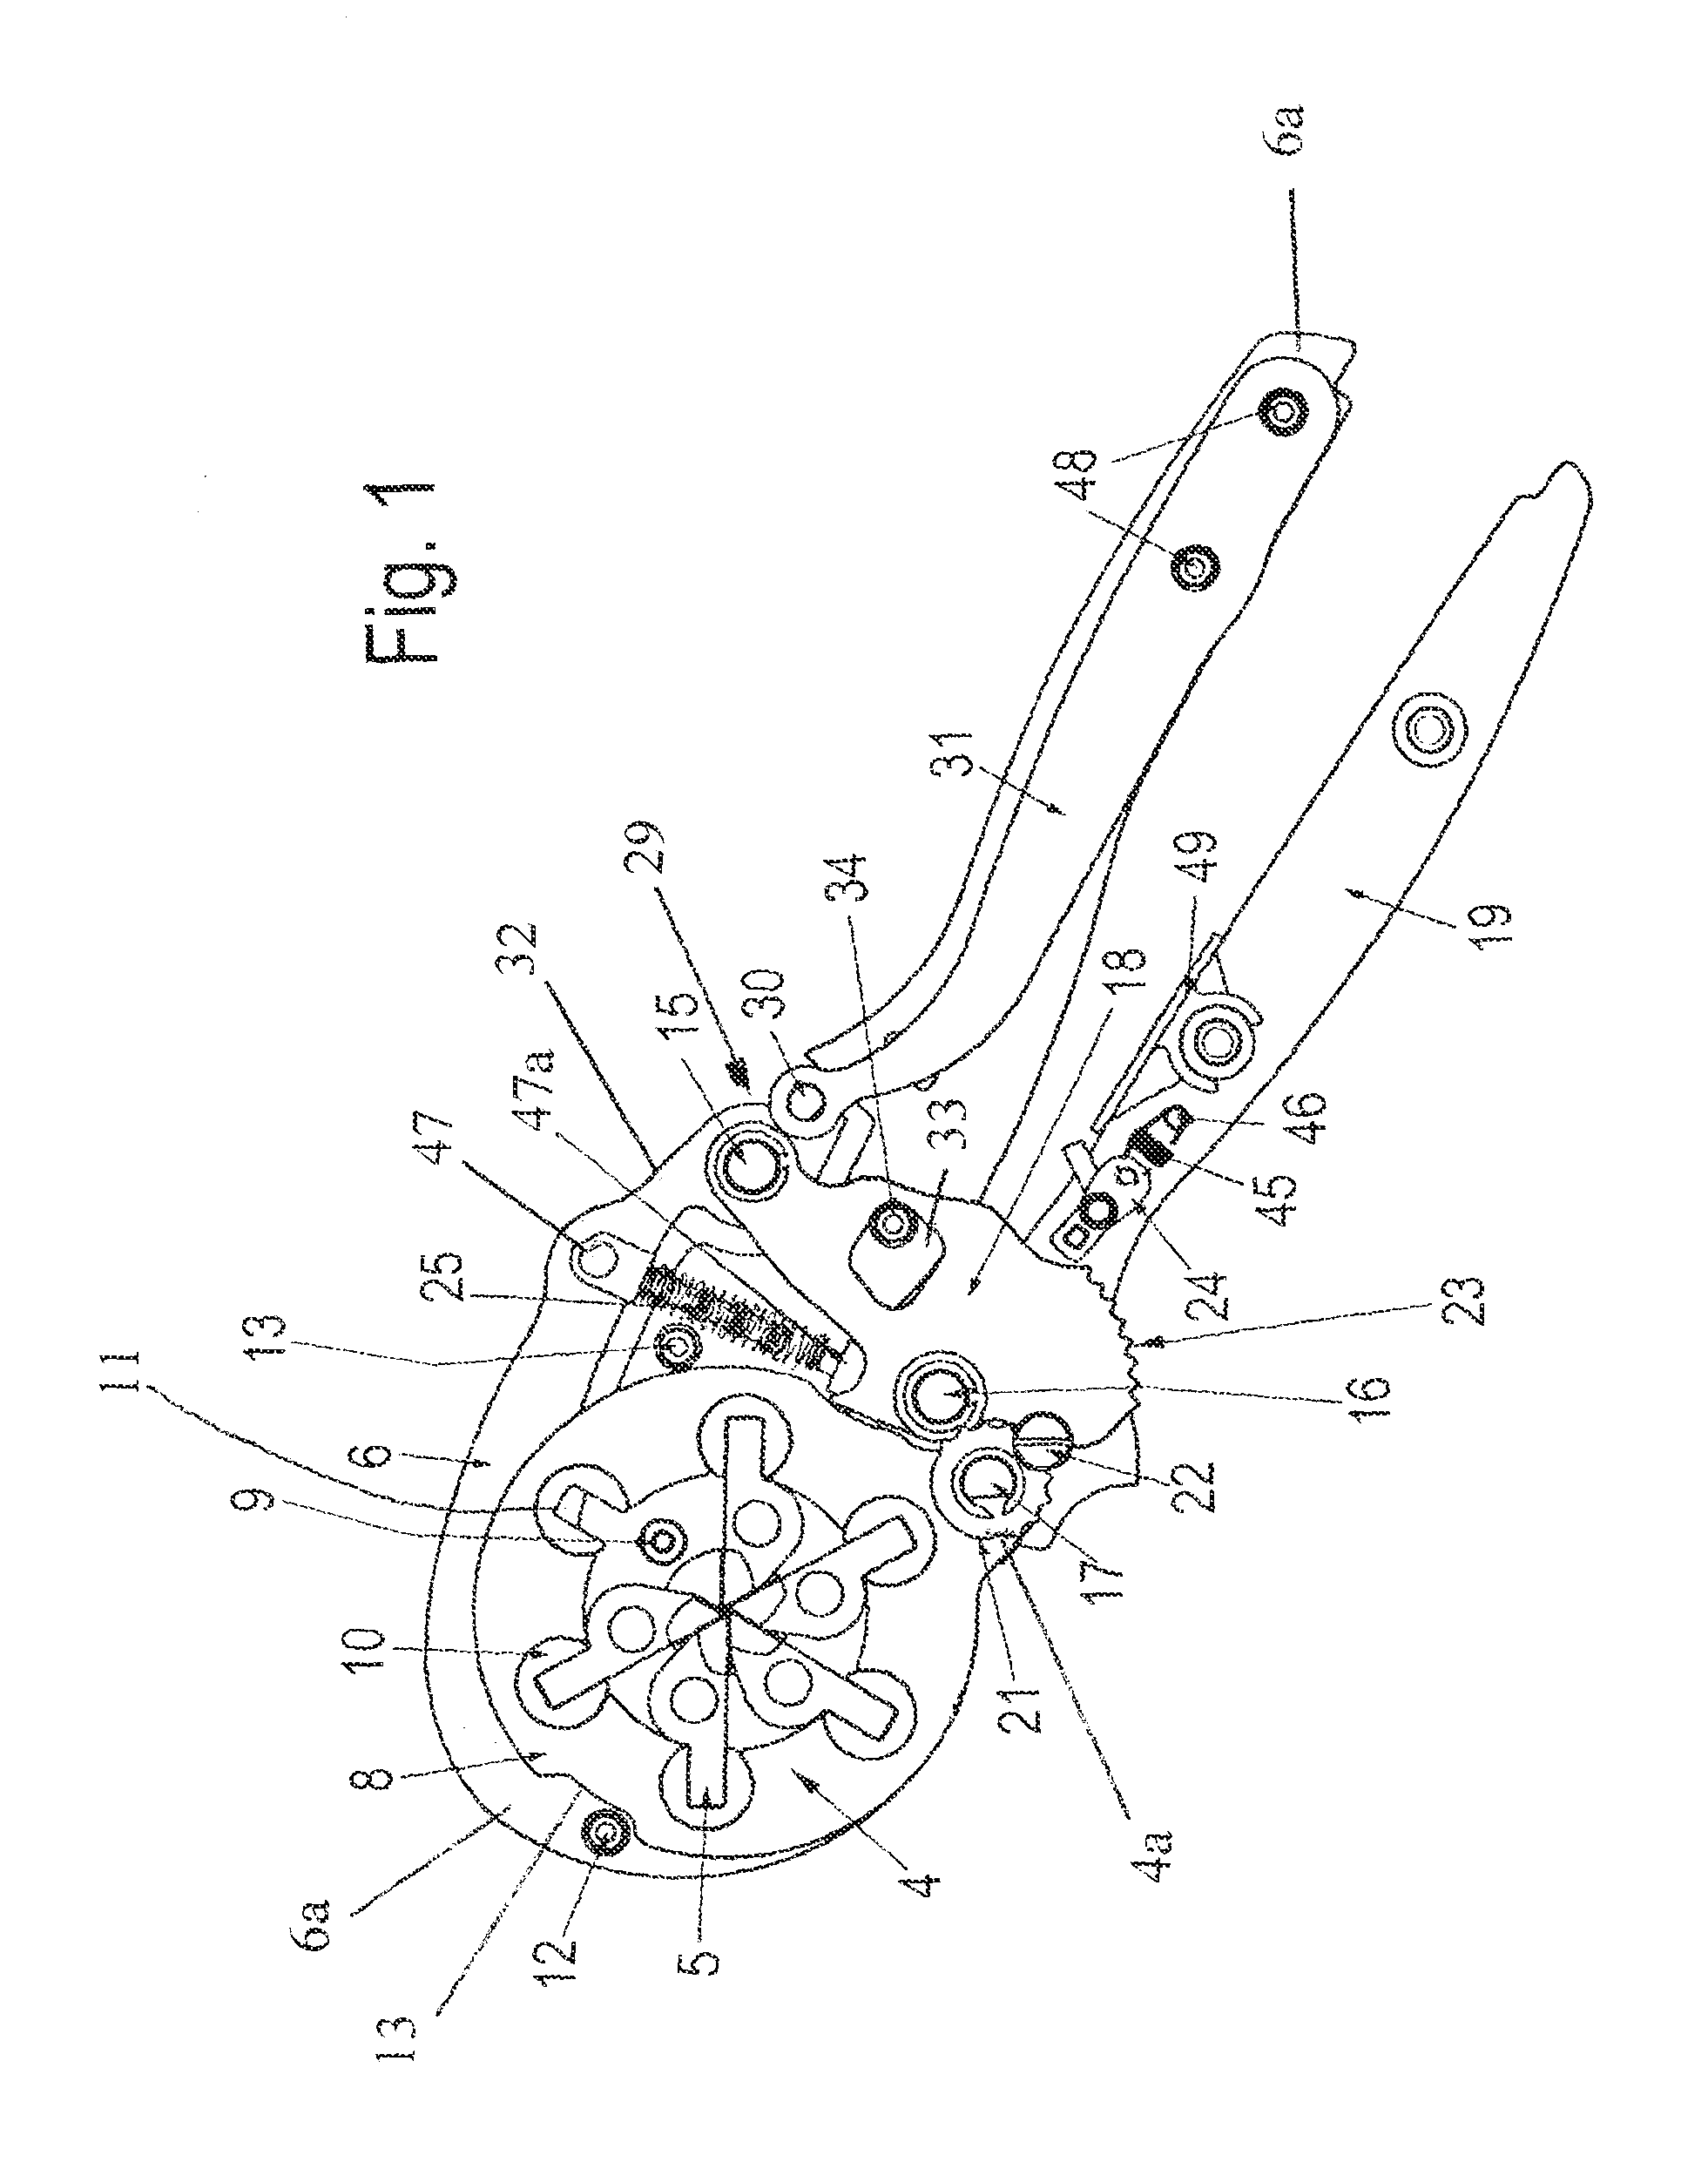 Crimping tool for wire end ferrules